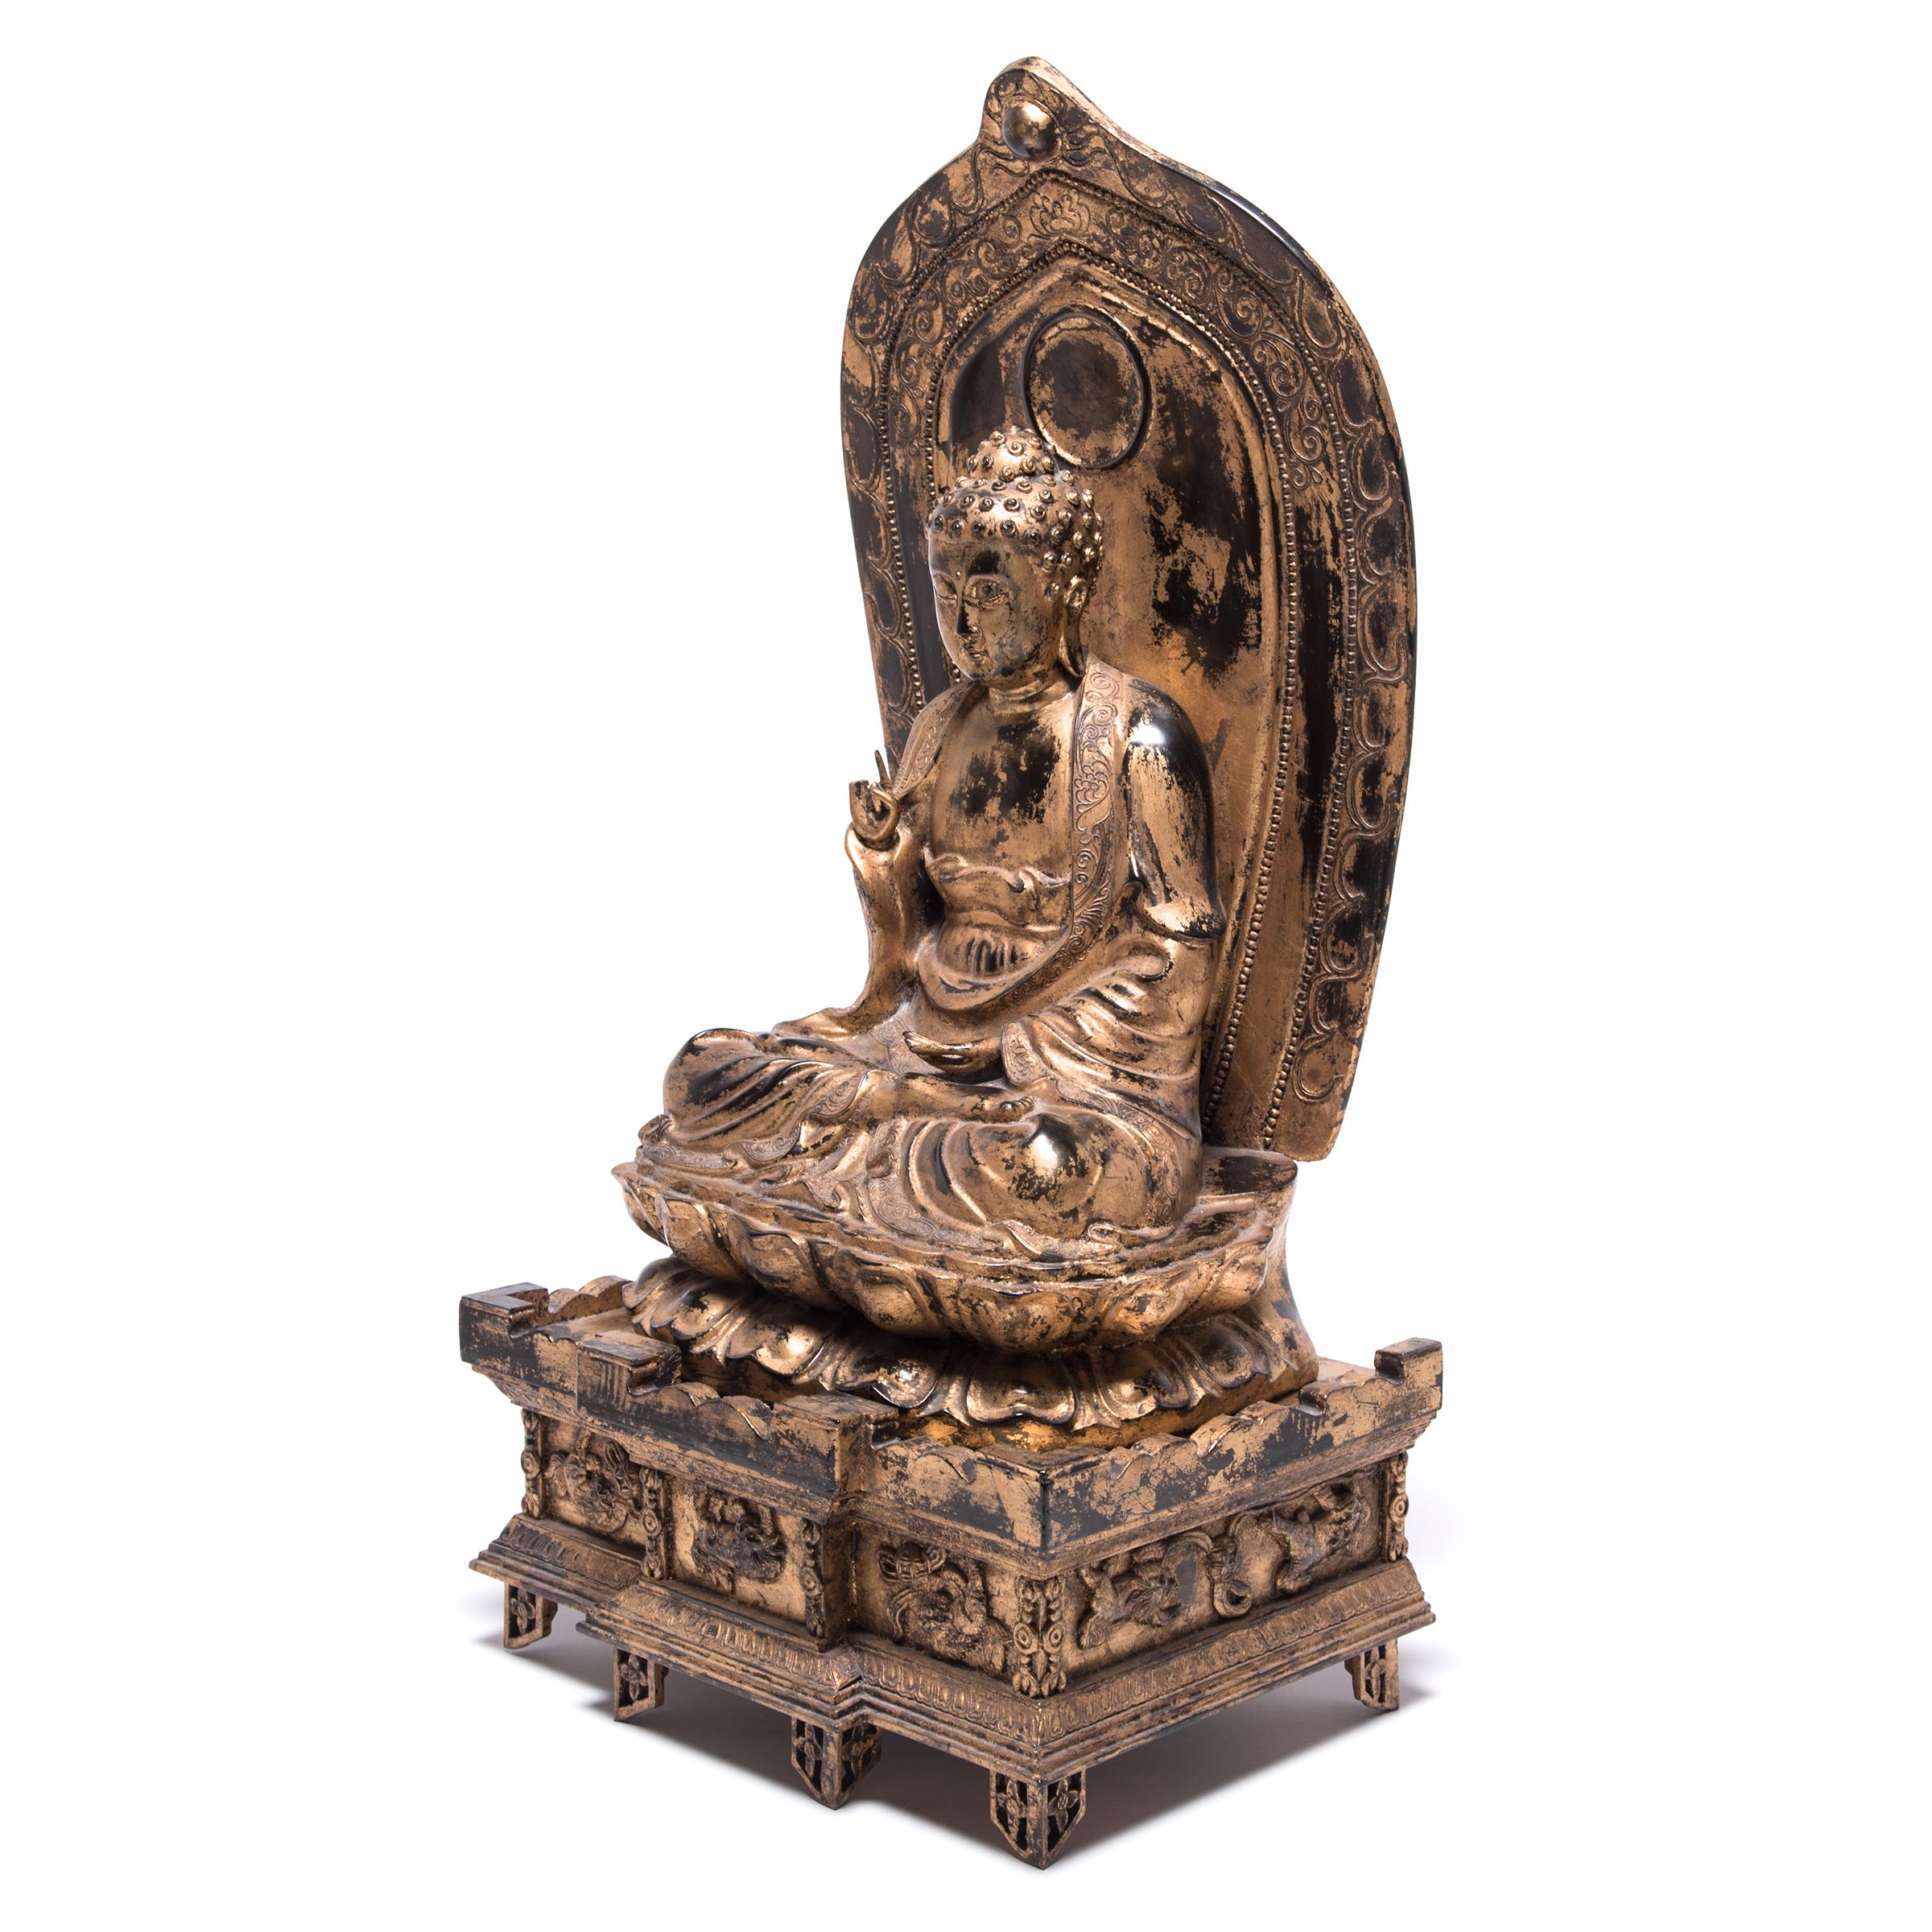 Intricately carved from wood, this exquisite Buddha was finished with gold leaf and lacquer. Adorned with guardian lion dogs playing with embroidered balls, an ornate, architectural base supports the lotus blossom on which the Buddha rests. Backed